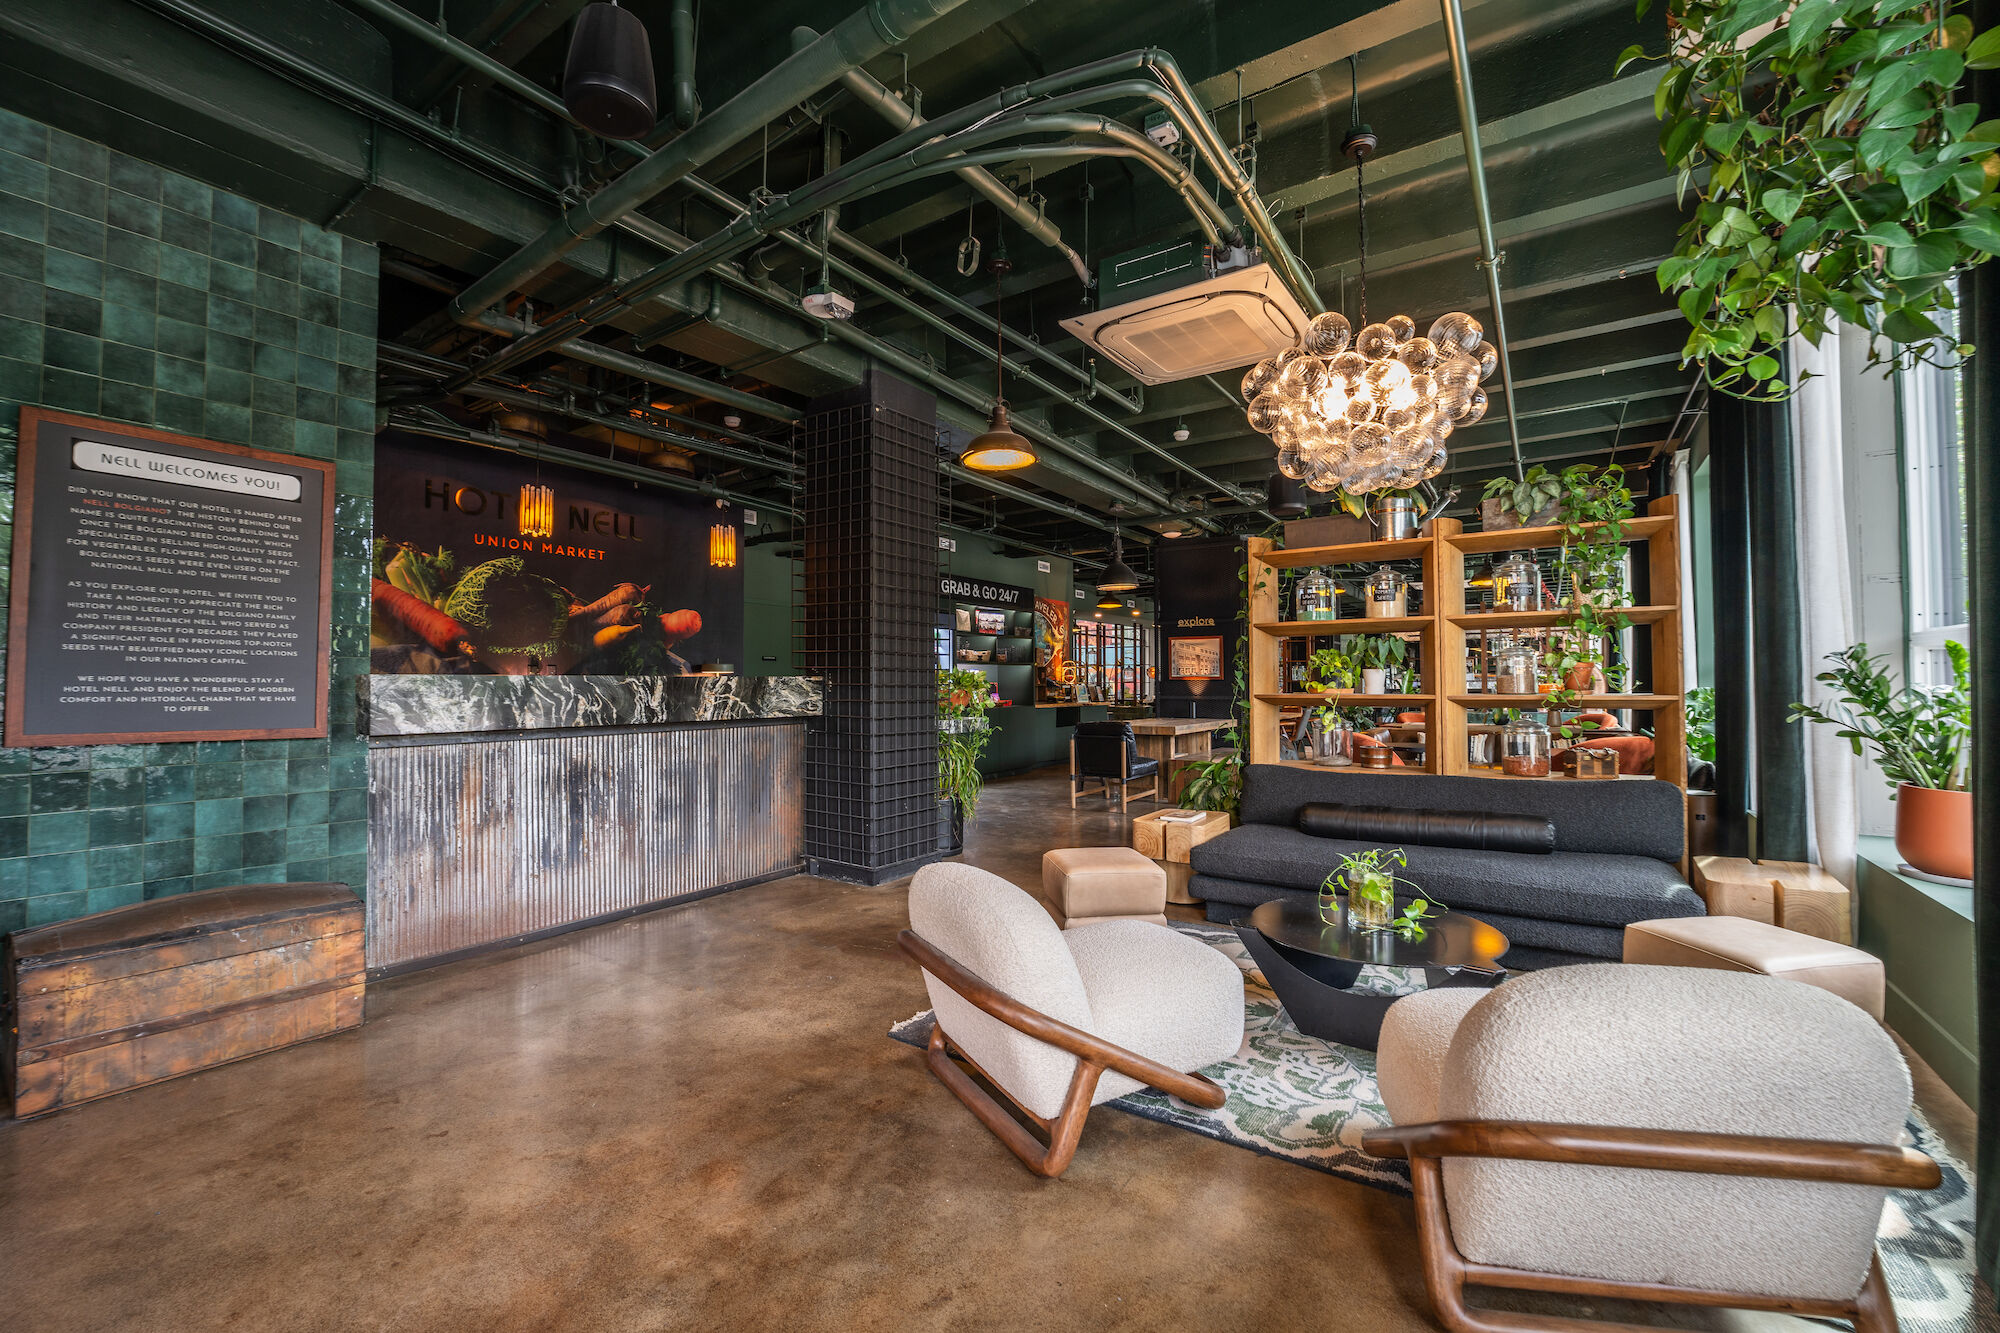 A modern lounge area with stylish seating, a chandelier, plants, and a reception desk. Decor includes bookshelves and green tiles ending the sentence.